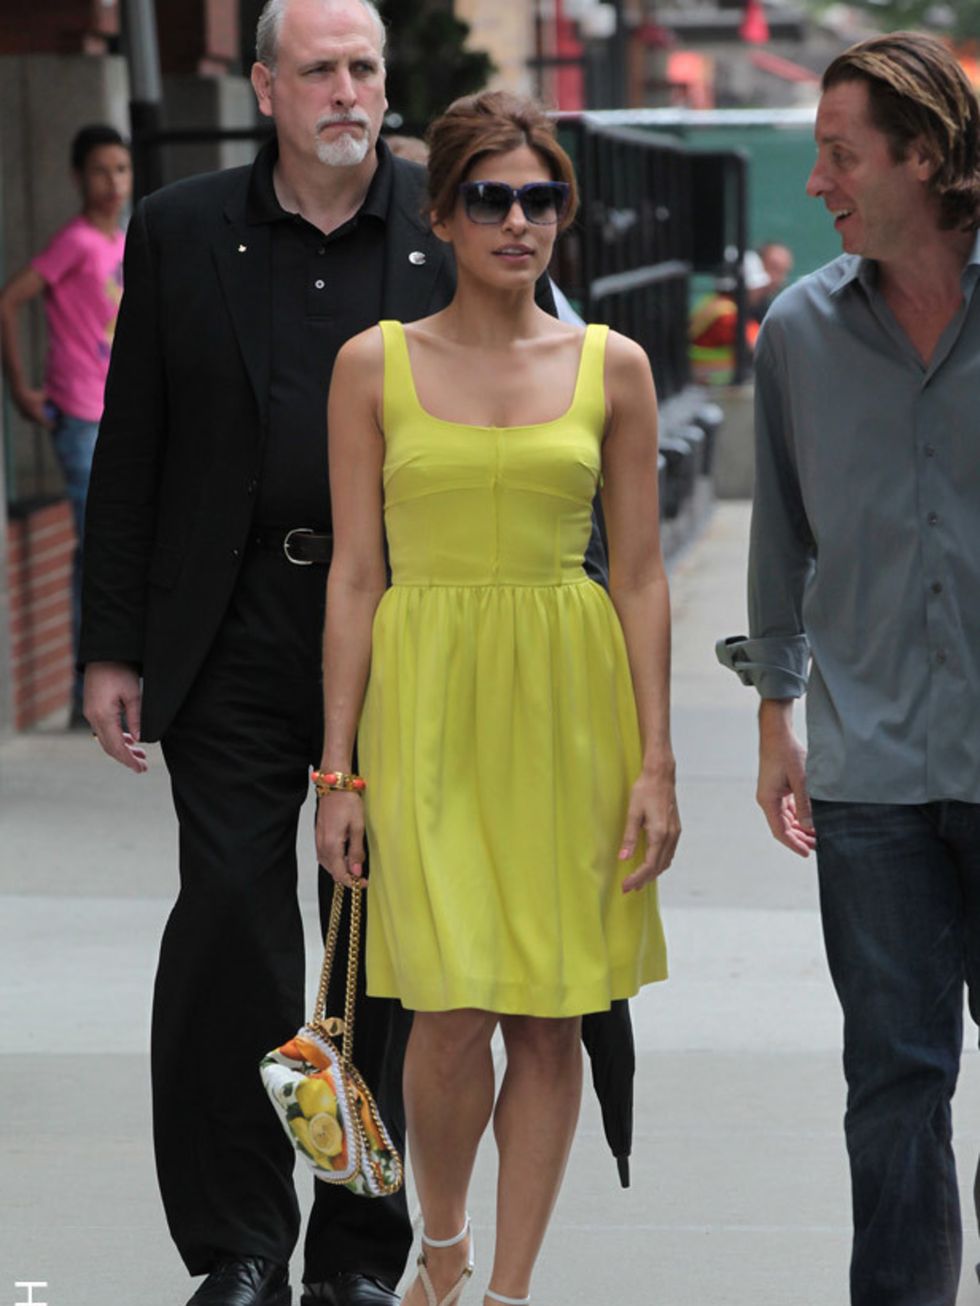 <p>Eva Mendes leaves her TriBeCa hotel wearing a sleeveless yellow dress and lemon print bag by <a href="http://www.elleuk.com/catwalk/collections/stella-mccartney/spring-summer-2011">Stella McCartney</a> finishing her look with Chloé wedges, June 2011.</